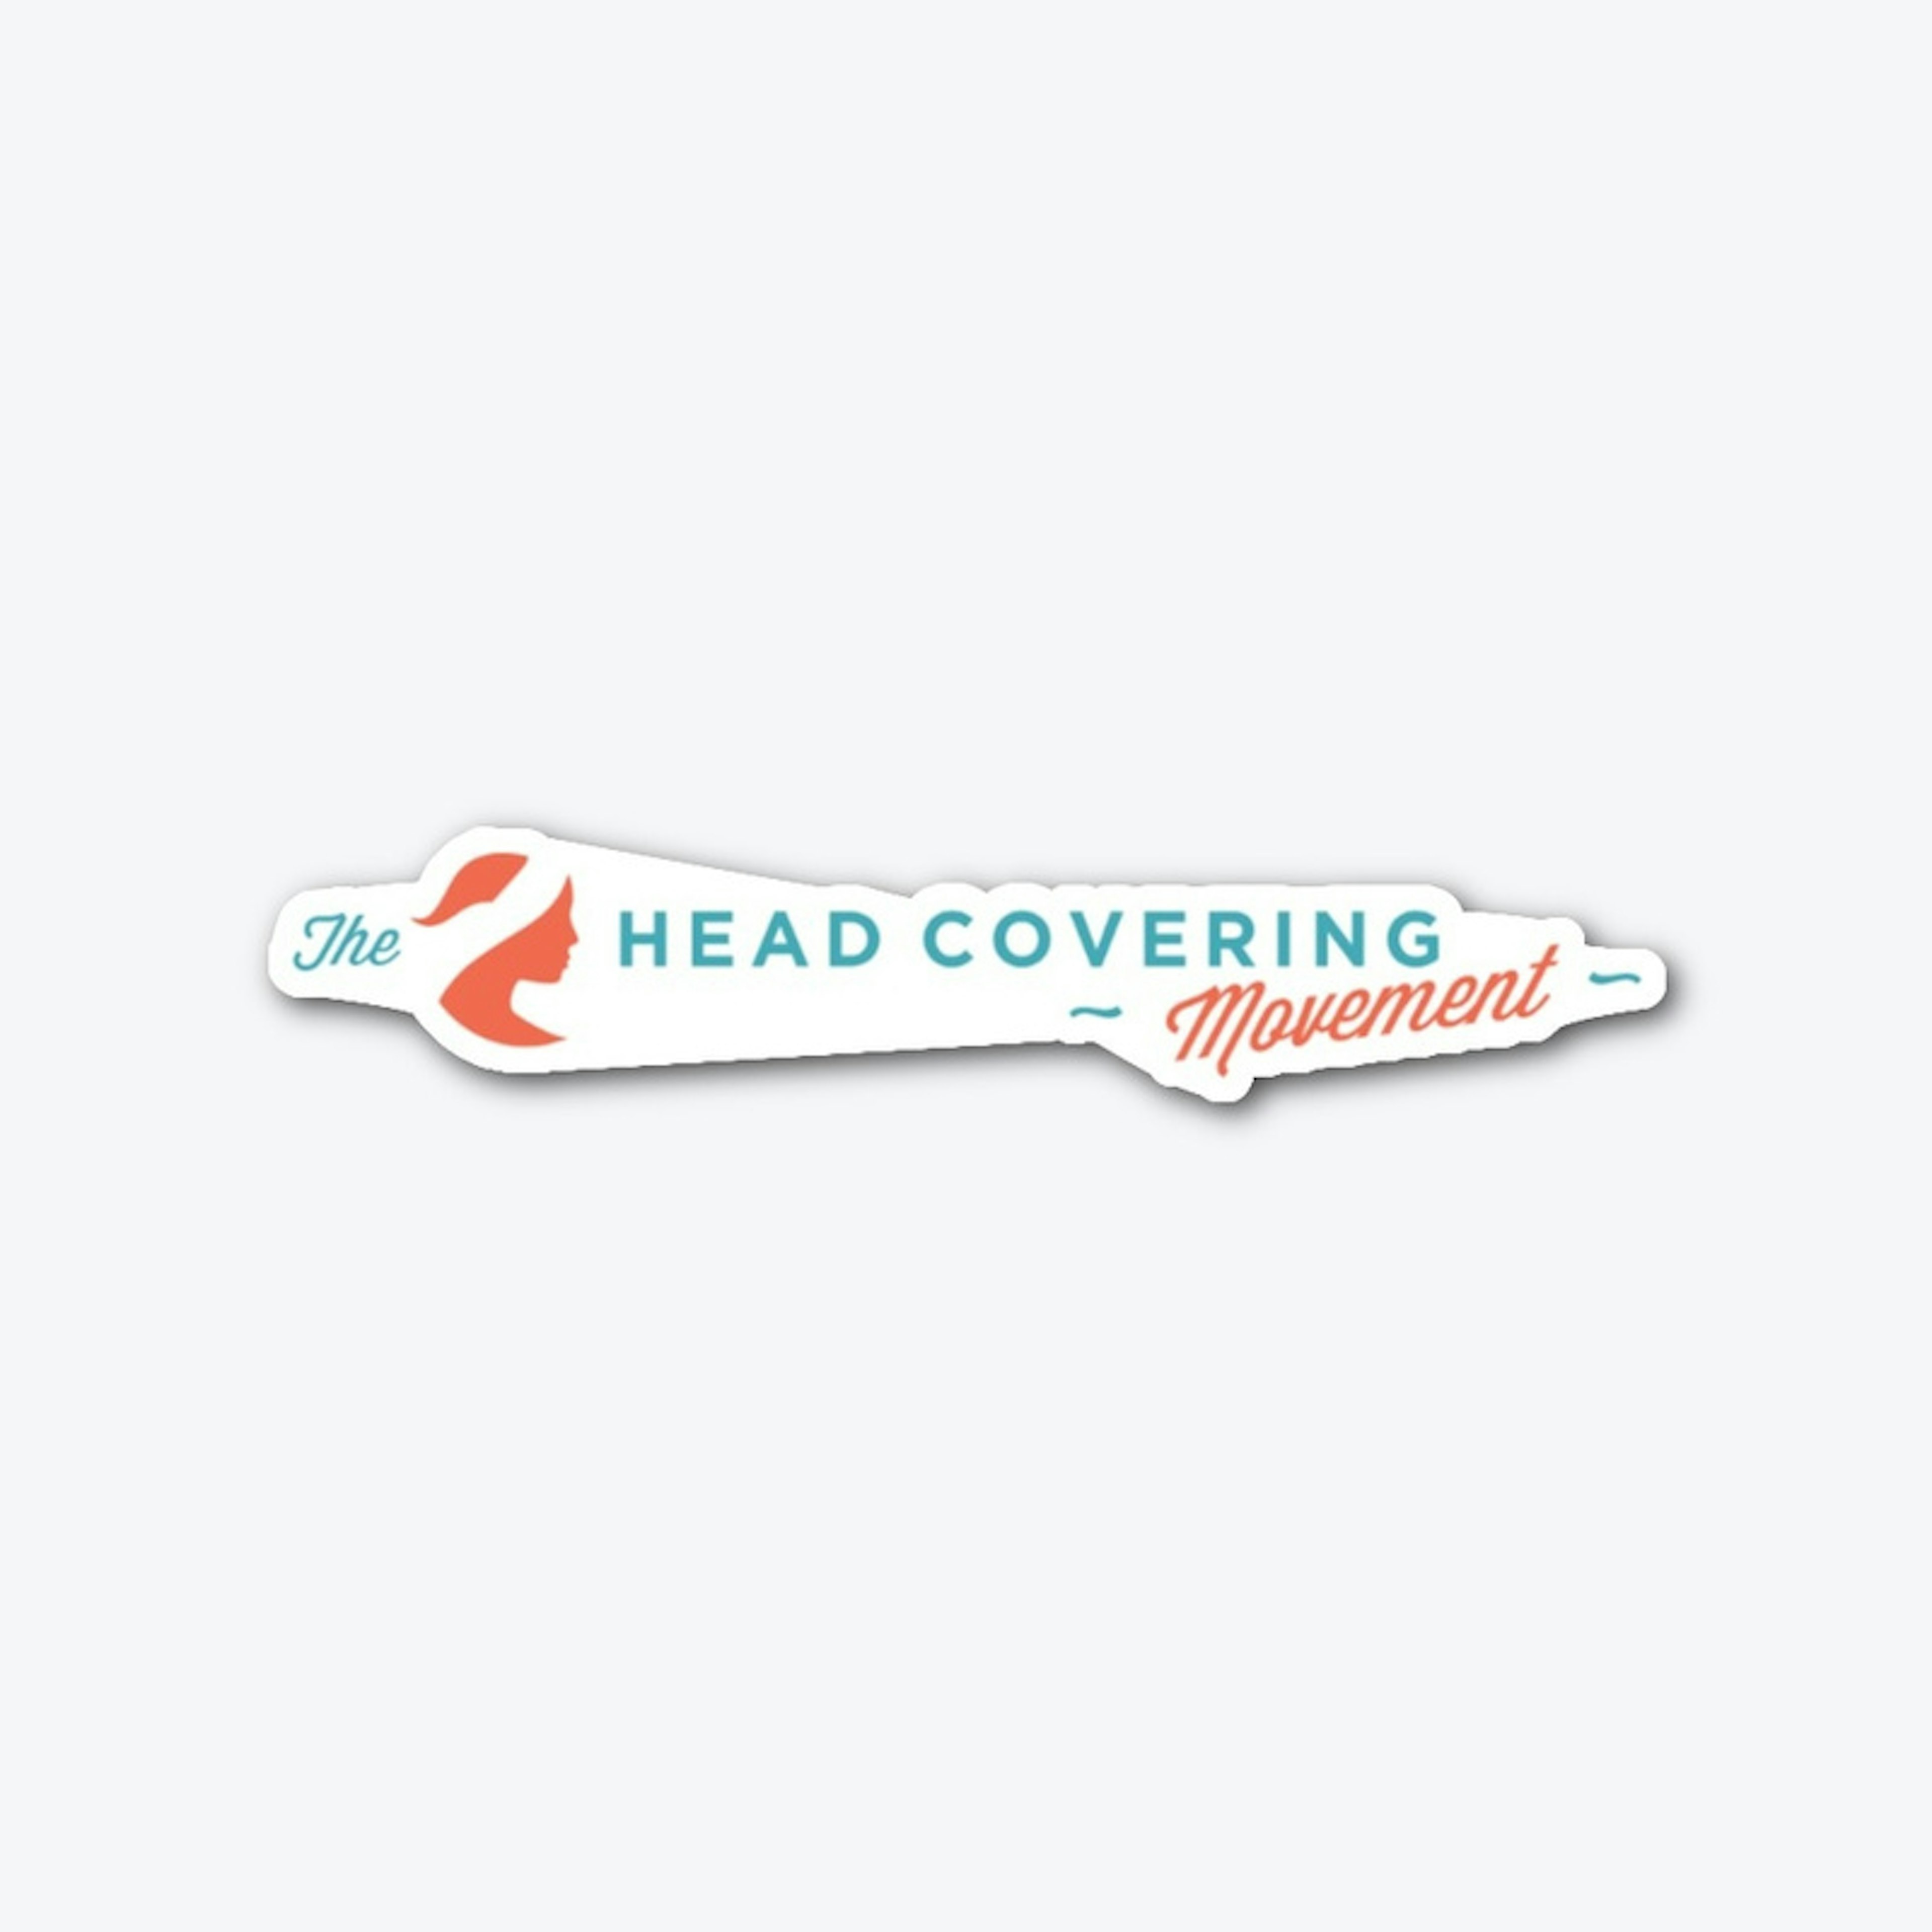 Head Covering Movement